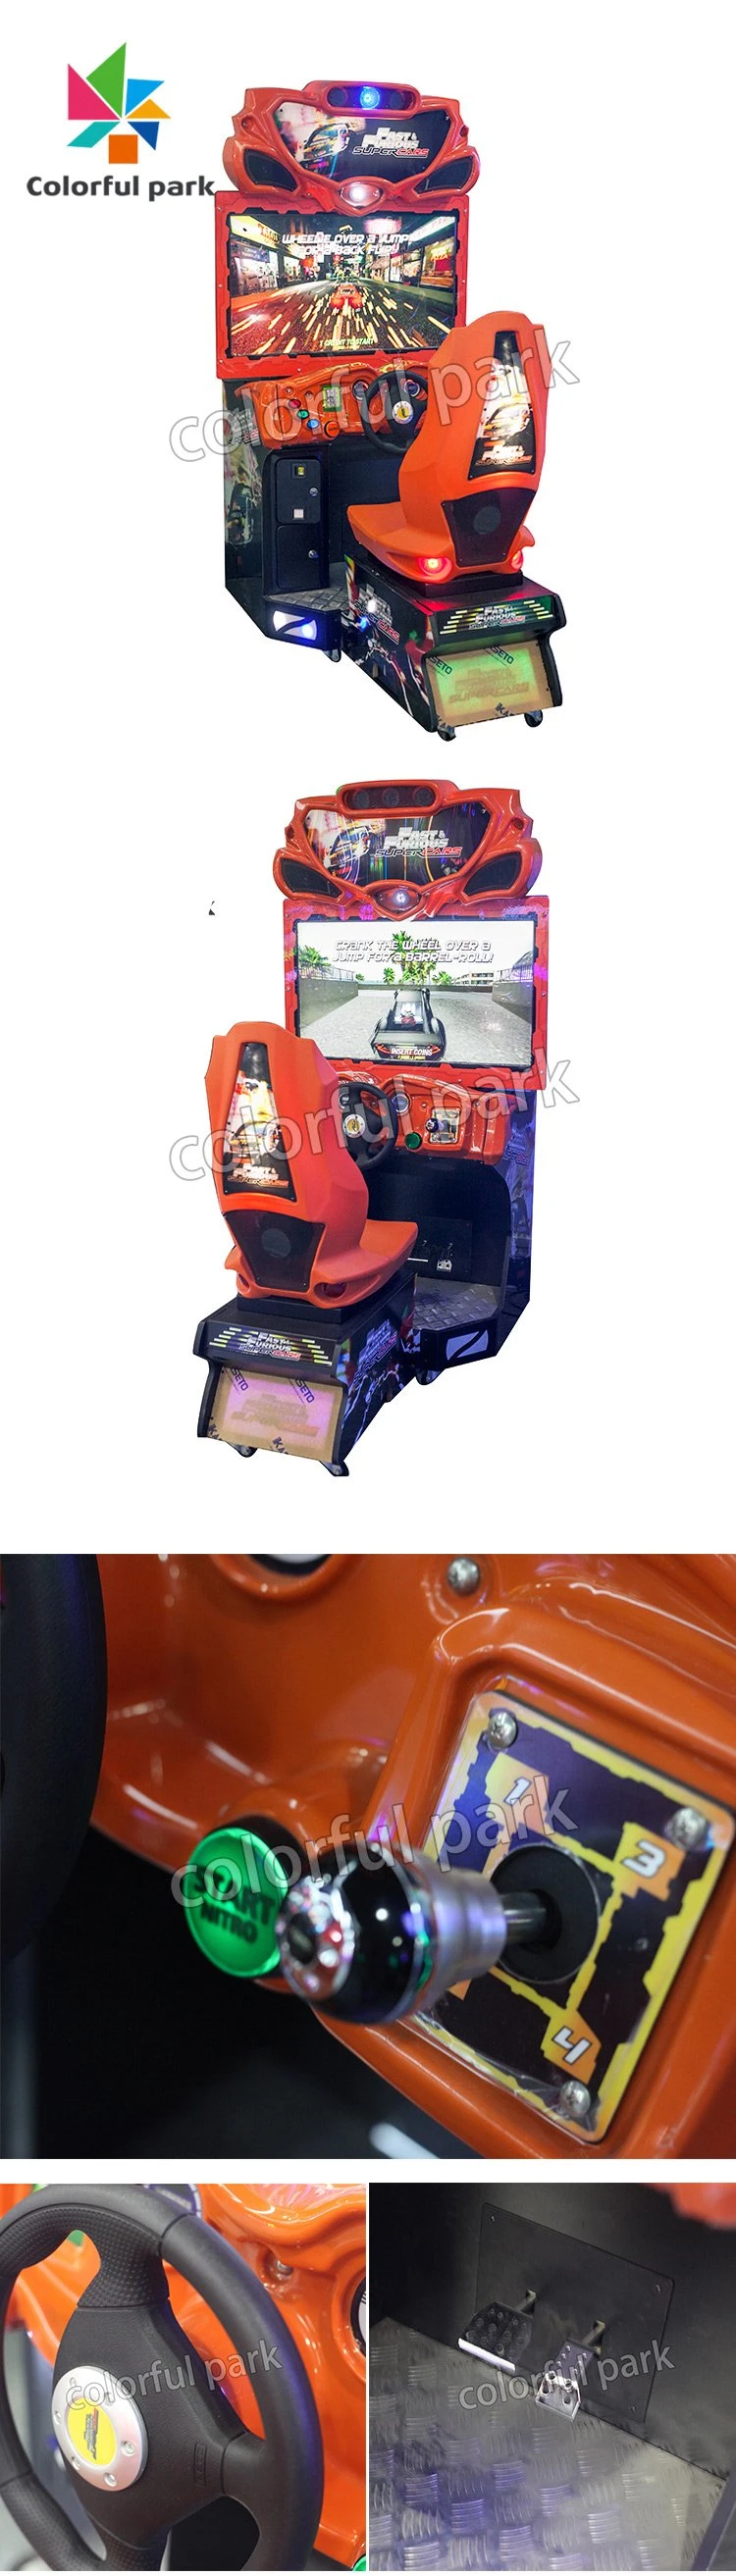 Video Game Machine Lottery Ticket Game Video Games Play Car Game Car Racing Game Machine